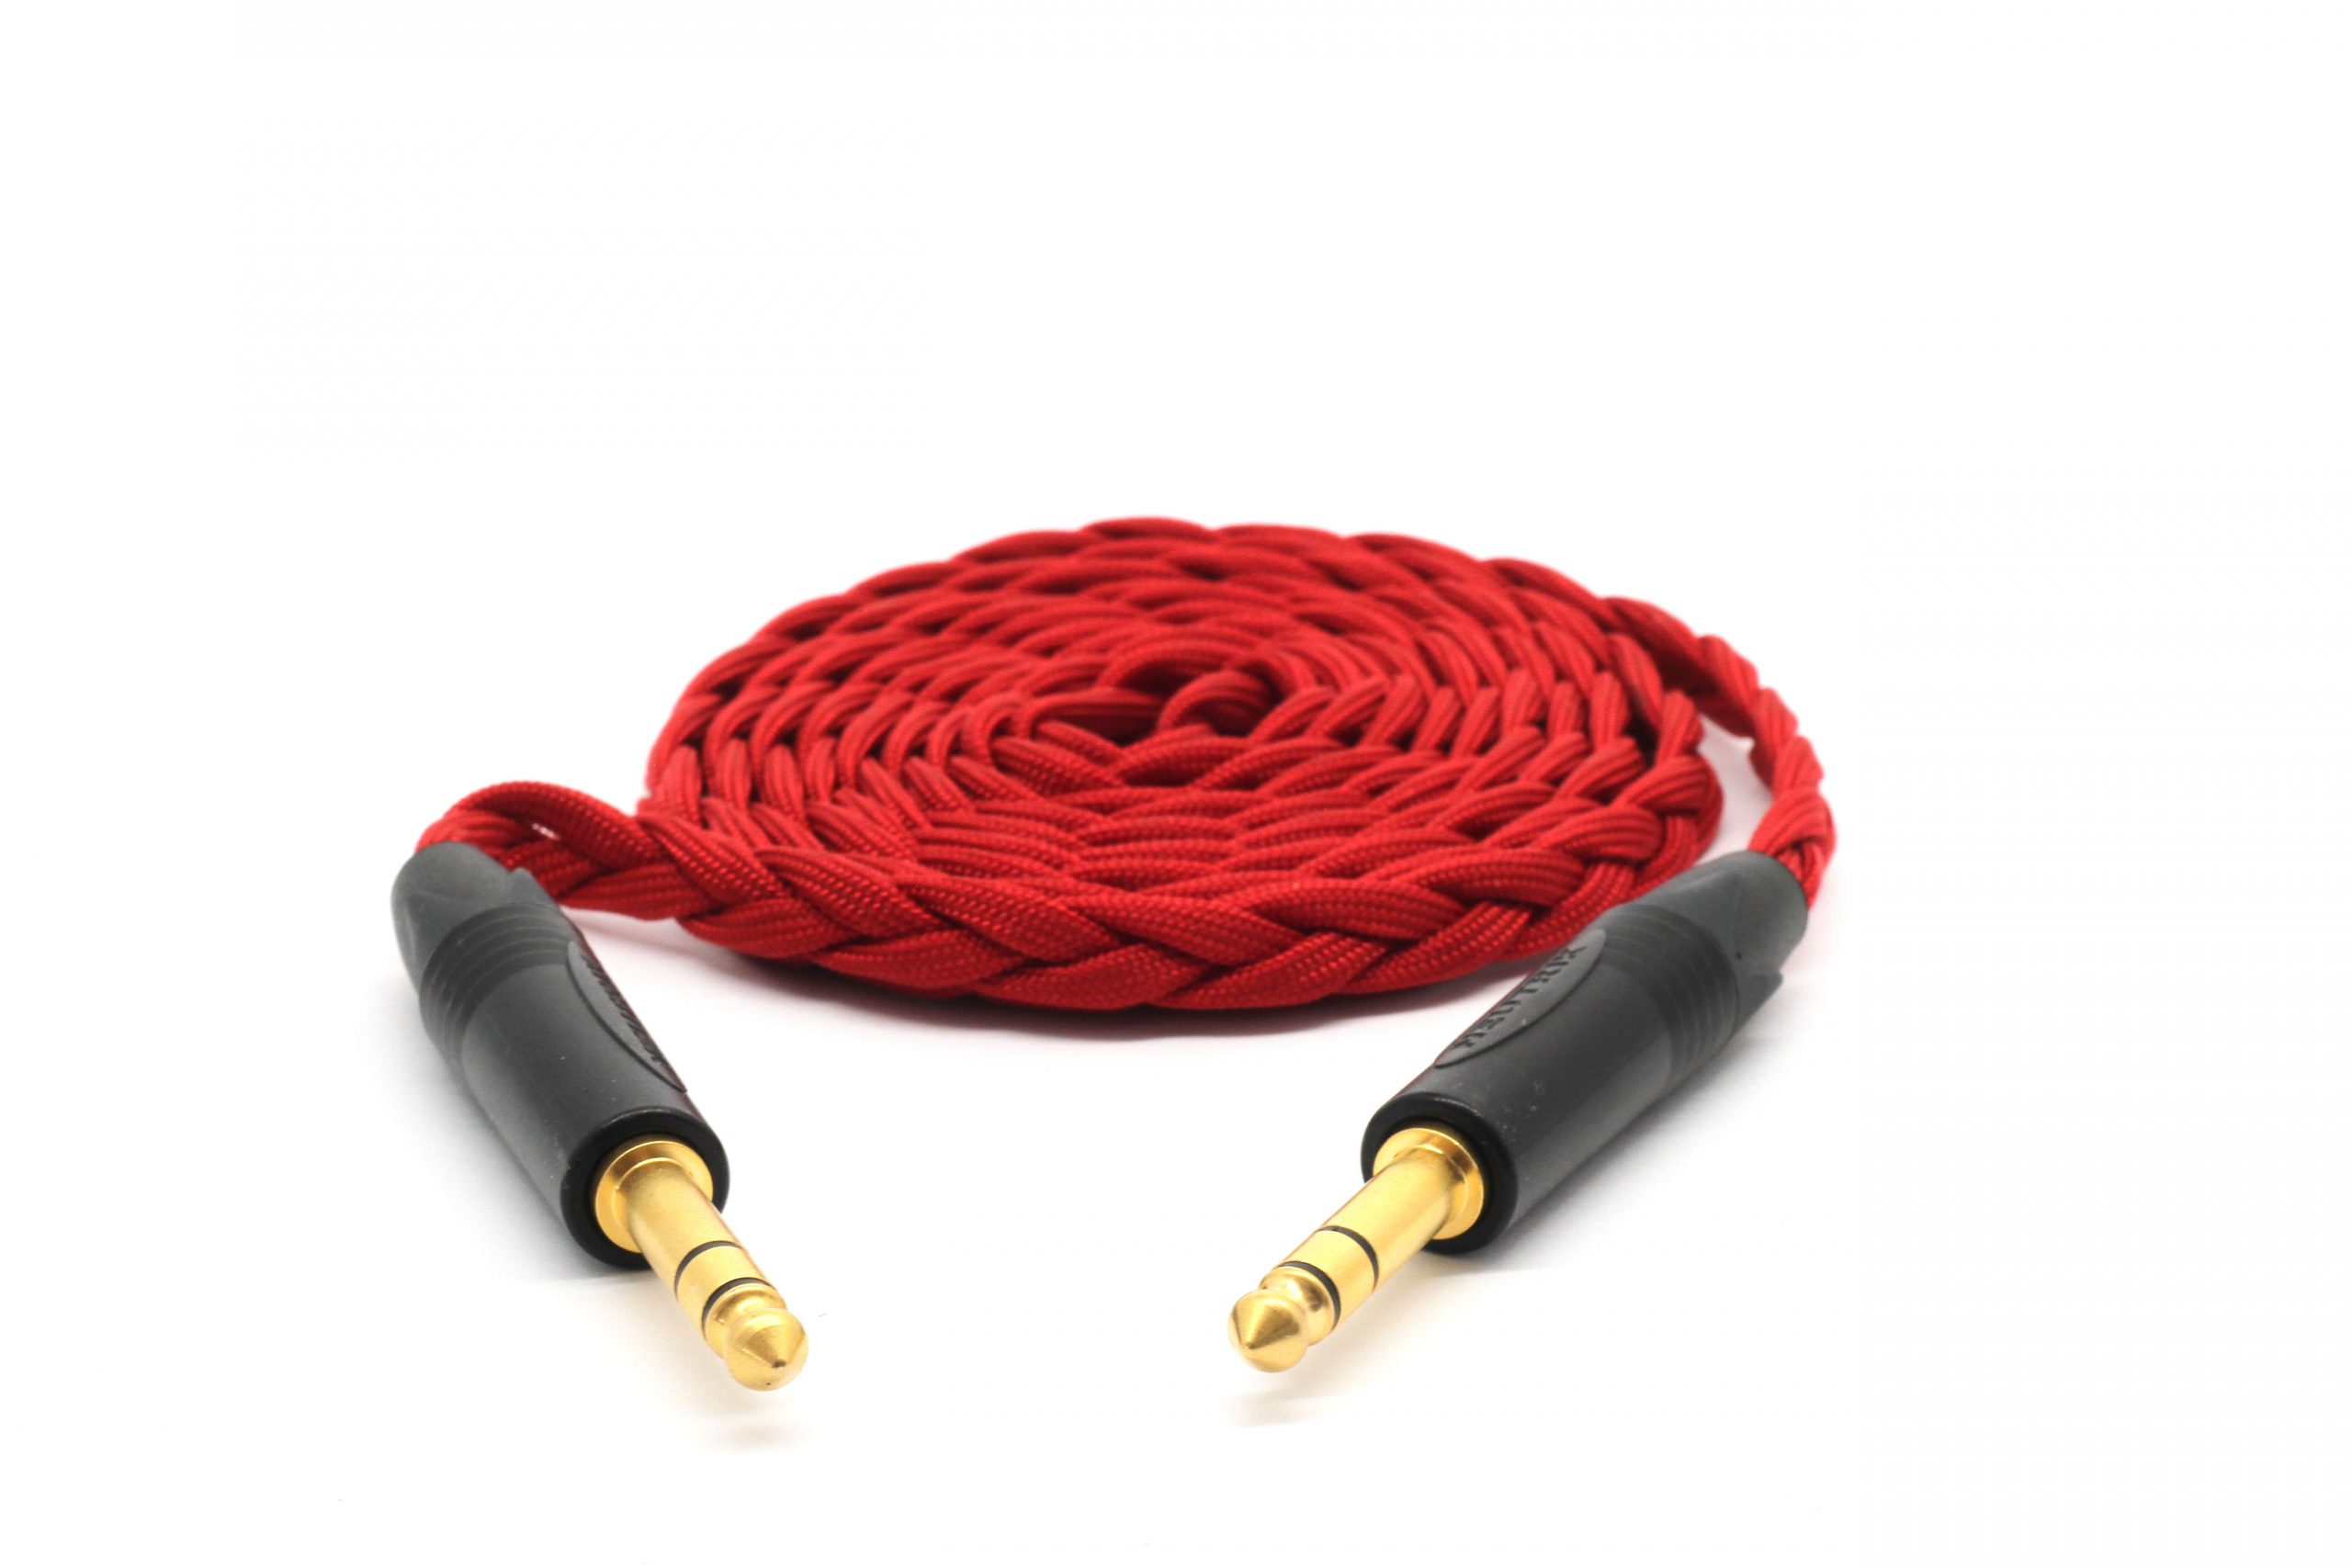 Ultra-low capacitance Headphone Extension or Patch Cable - Custom Cans Shop